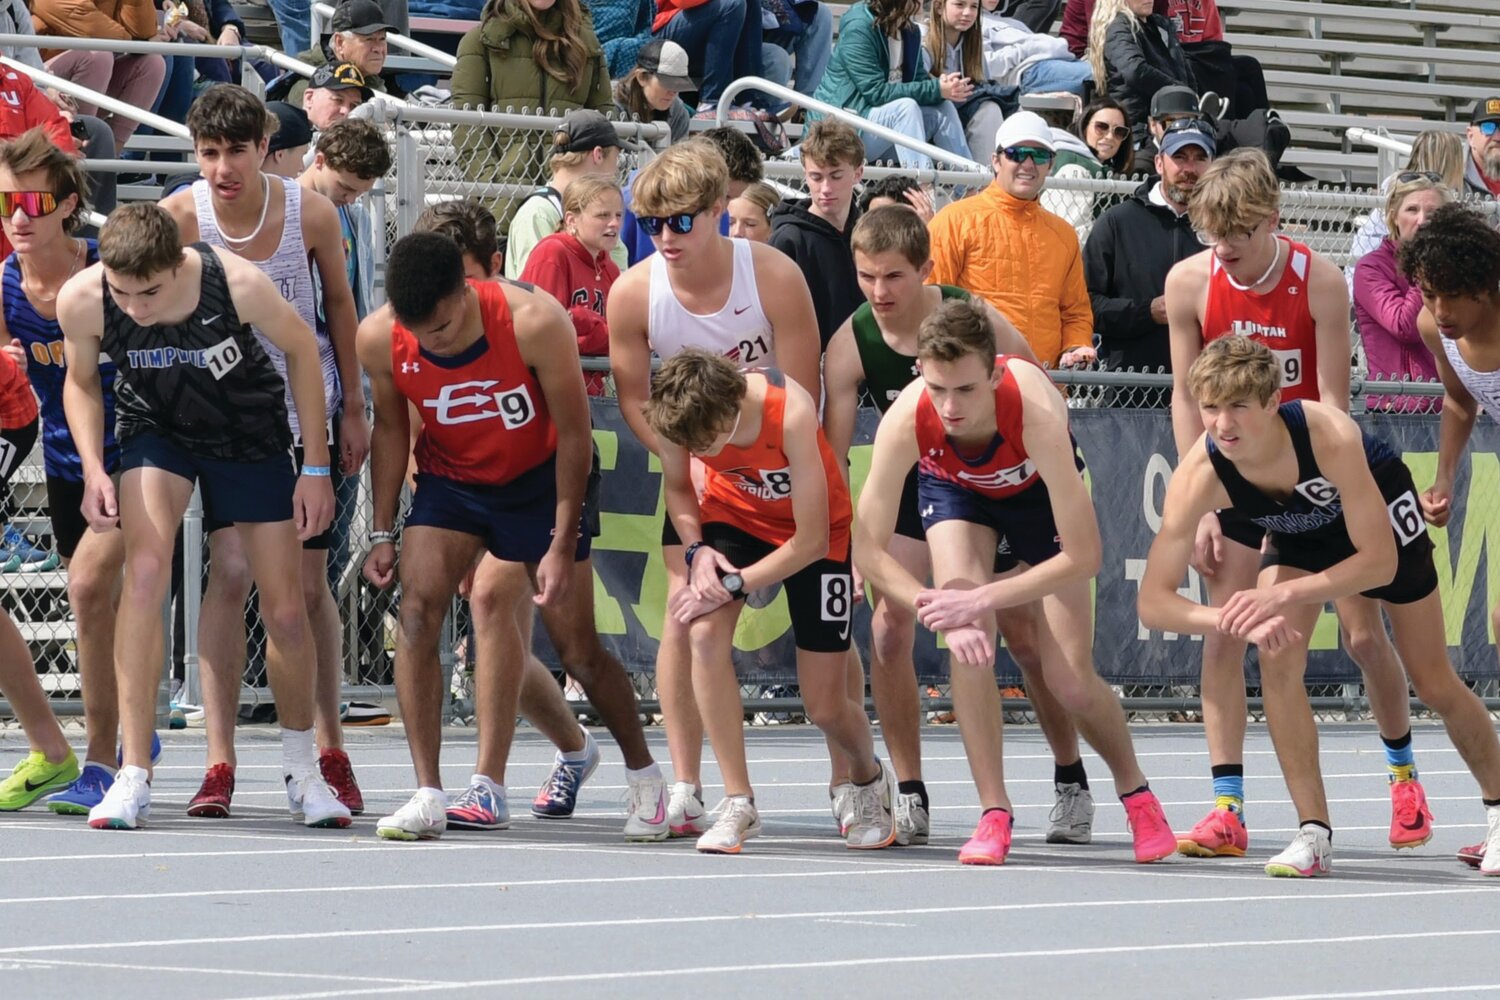 EHS distance runneers Jamar McDowell (No.9, left) and Paul Baxter (No. 7) ready themselves at the starting line of the 1600 meters last week at the Alpha Invitational, in Orem, Utah. McDowell finished 25th, while Baxter finished 30th.